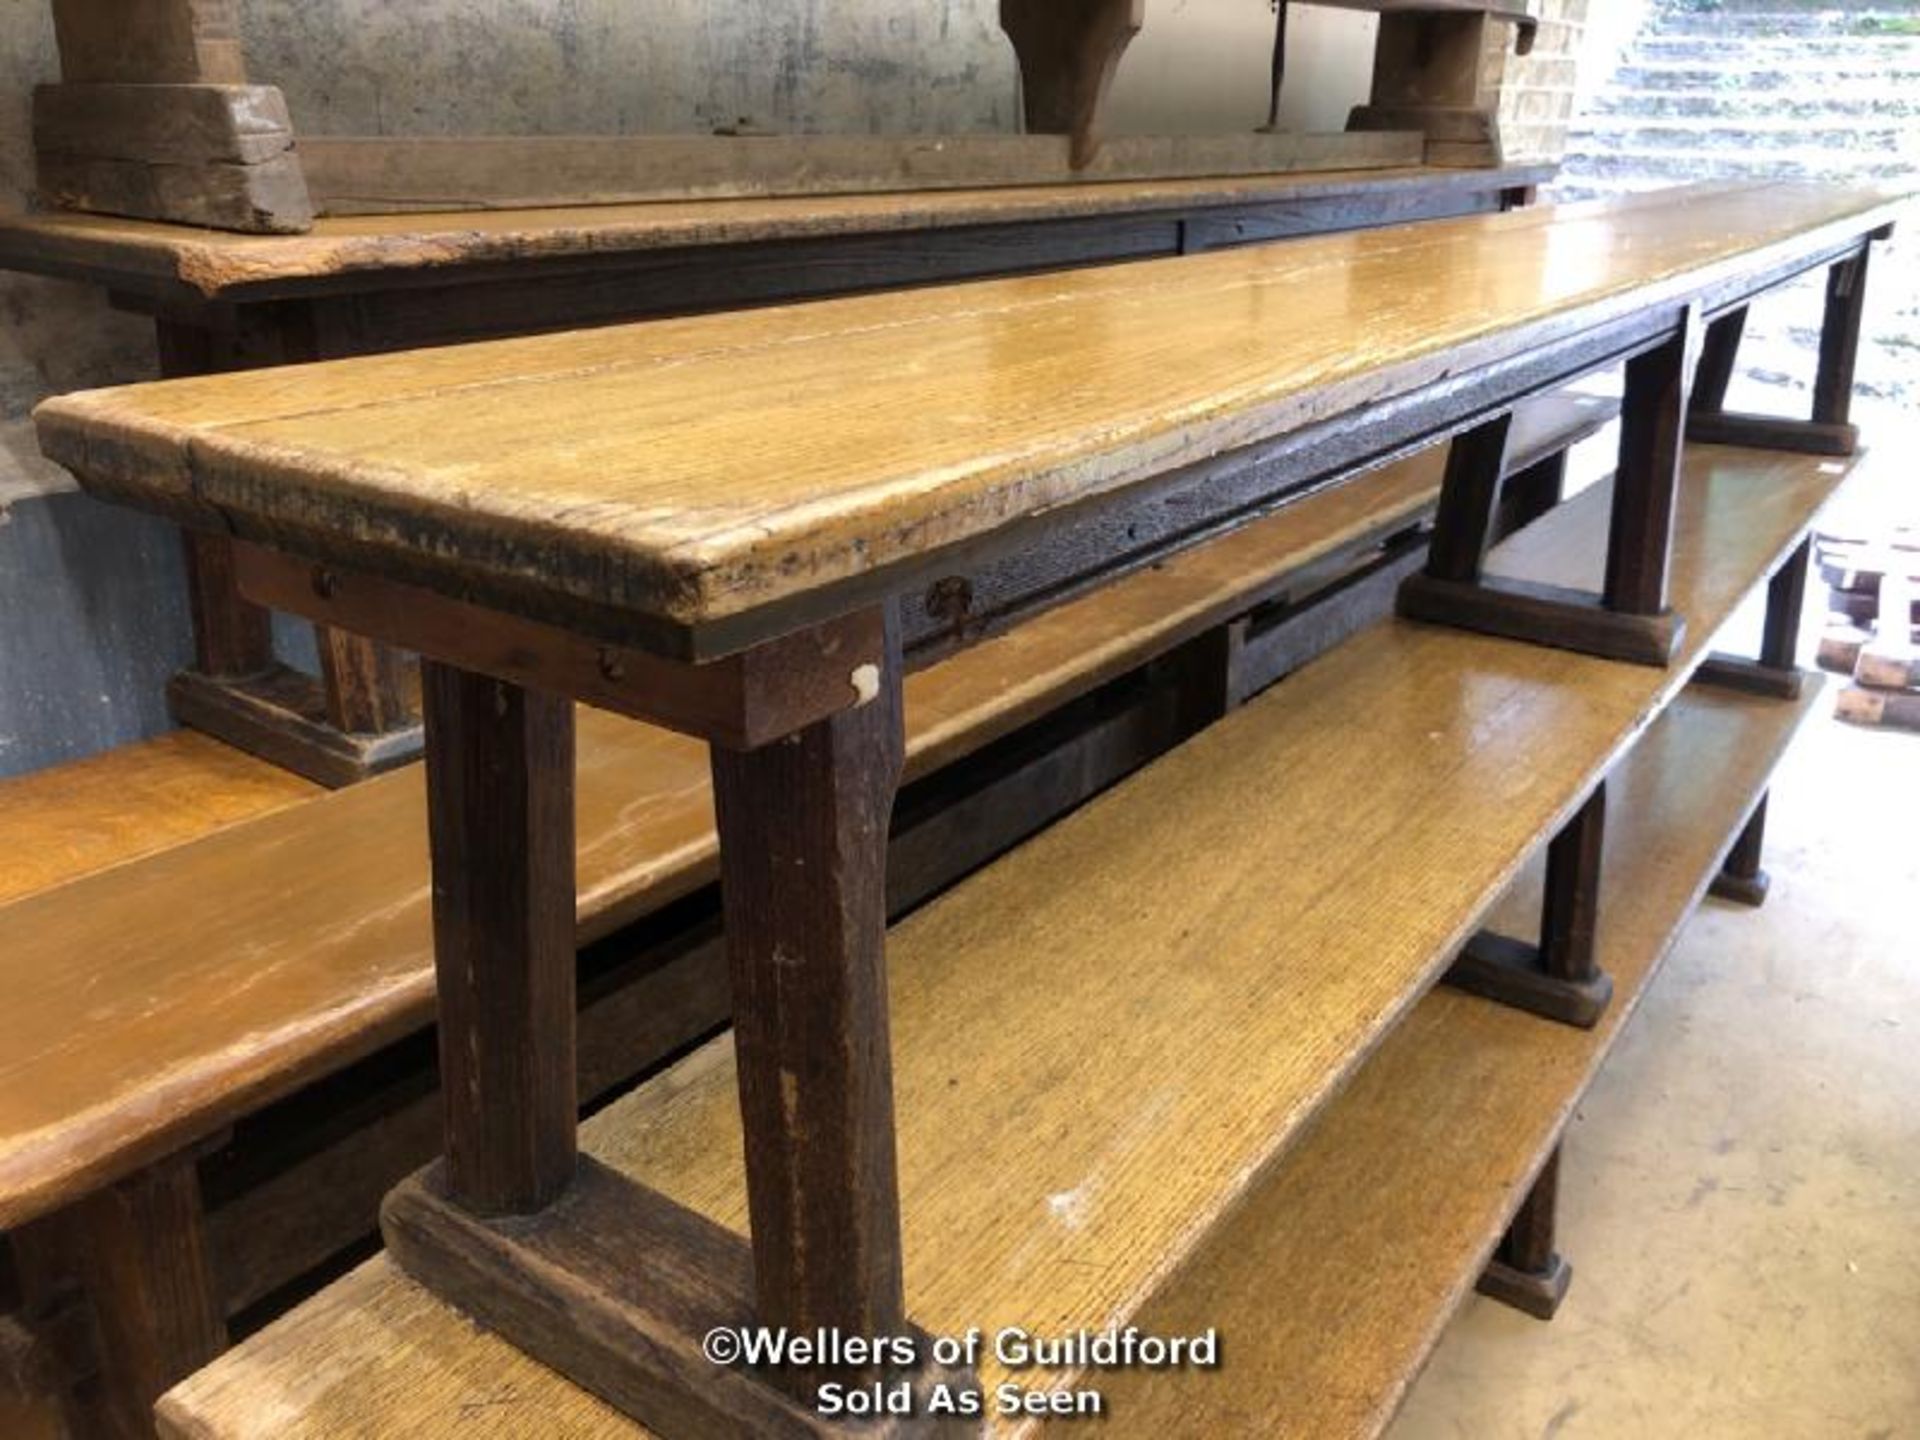 *OAK GYMNASIUM BENCH WITH 3 FEET - 2.98M L - Image 2 of 2